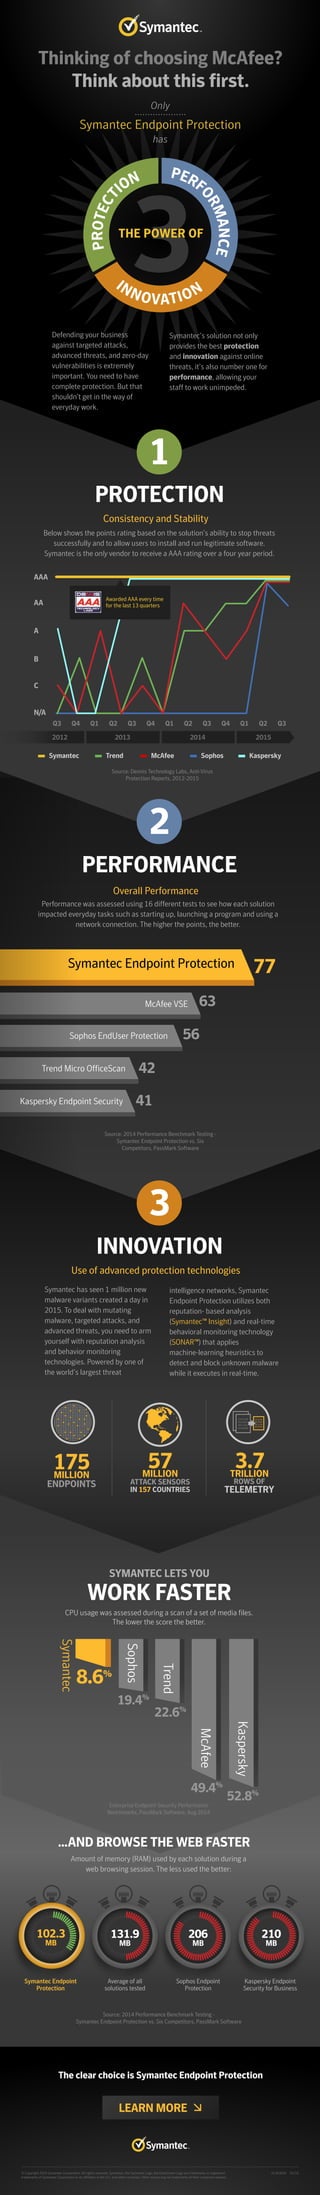 Symantec has seen 1 million new
malware variants created a day in
2015. To deal with mutating
malware, targeted attacks, and
advanced threats, you need to arm
yourself with reputation analysis
and behavior monitoring
technologies. Powered by one of
the world’s largest threat
intelligence networks, Symantec
Endpoint Protection utilizes both
reputation- based analysis
(Symantec™ Insight) and real-time
behavioral monitoring technology
(SONAR™) that applies
machine-learning heuristics to
detect and block unknown malware
while it executes in real-time.
INNOVATION
SYMANTEC LETS YOU
WORK FASTER
Use of advanced protection technologies
THE POWER OF
PROTECT
ION PERF
ORMANCE
INNOVATION
Below shows the points rating based on the solution’s ability to stop threats
successfully and to allow users to install and run legitimate software.
Symantec is the only vendor to receive a AAA rating over a four year period.
Thinking of choosing McAfee?
Think about this first.
Symantec Endpoint Protection
Only
has
Defending your business
against targeted attacks,
advanced threats, and zero-day
vulnerabilities is extremely
important. You need to have
complete protection. But that
shouldn’t get in the way of
everyday work.
Symantec’s solution not only
provides the best protection
and innovation against online
threats, it’s also number one for
performance, allowing your
staff to work unimpeded.
1
PROTECTION
McAfee VSE
Sophos EndUser Protection
Trend Micro OfficeScan
Kaspersky Endpoint Security
Symantec Endpoint Protection
Source: Dennis Technology Labs, Anti-Virus
Protection Reports, 2012-2015
2
PERFORMANCE
AAA
AA
B
C
A
N/A
Q3 Q4 Q1 Q2 Q3 Q4 Q1 Q2 Q3 Q4 Q1 Q2 Q3
2012 2013 2014 2015
Symantec Trend McAfee Sophos Kaspersky
Overall Performance
Consistency and Stability
3
Source: 2014 Performance Benchmark Testing -
Symantec Endpoint Protection vs. Six
Competitors, PassMark Software
77
63
56
42
41
Performance was assessed using 16 different tests to see how each solution
impacted everyday tasks such as starting up, launching a program and using a
network connection. The higher the points, the better.
Source: 2014 Performance Benchmark Testing -
Symantec Endpoint Protection vs. Six Competitors, PassMark Software
The clear choice is Symantec Endpoint Protection
Average of all
solutions tested
Sophos Endpoint
Protection
206
MB
Kaspersky Endpoint
Security for Business
210
MB
131.9
MB
LEARN MORE
102.3
MB
CPU usage was assessed during a scan of a set of media files.
The lower the score the better.
175MILLION MILLION TRILLION
ENDPOINTS
3.7
ROWS OF
TELEMETRY
57
ATTACK SENSORS
IN 157 COUNTRIES
Awarded AAA every time
for the last 13 quarters
1010100
0010001
0011001
0010000
1010100
0010001
0011001
0010000
Symantec
8.6%
19.4%
22.6%
52.8%
Kaspersky
49.4%
McAfee
Sophos
Trend
Enterprise Endpoint Security Performance
Benchmarks, PassMark Software, Aug 2014
© Copyright 2016 Symantec Corporation. All rights reserved. Symantec, the Symantec Logo, the Checkmark Logo are trademarks or registered
trademarks of Symantec Corporation or its affiliates in the U.S. and other countries. Other names may be trademarks of their respective owners.
21363026 01/16
...AND BROWSE THE WEB FASTER
Amount of memory (RAM) used by each solution during a
web browsing session. The less used the better:
Symantec Endpoint
Protection
 